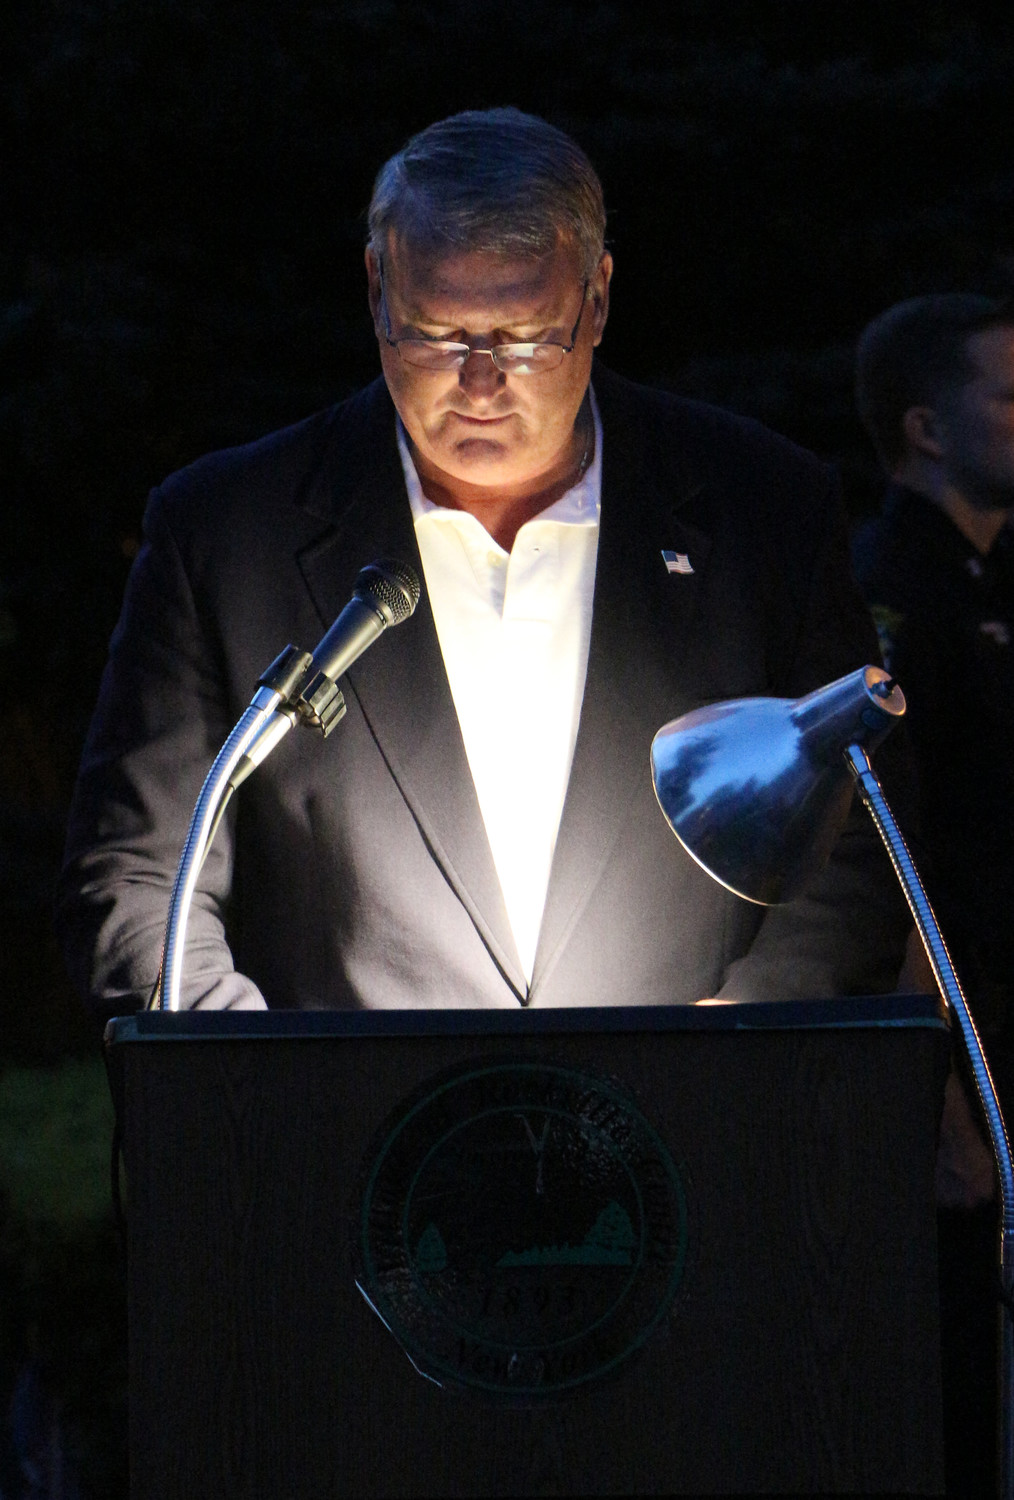 Pat O’Brien, whose brother and brother-in-law died on Sept. 11, 2001, spoke at the village’s annual ceremony last Sunday.